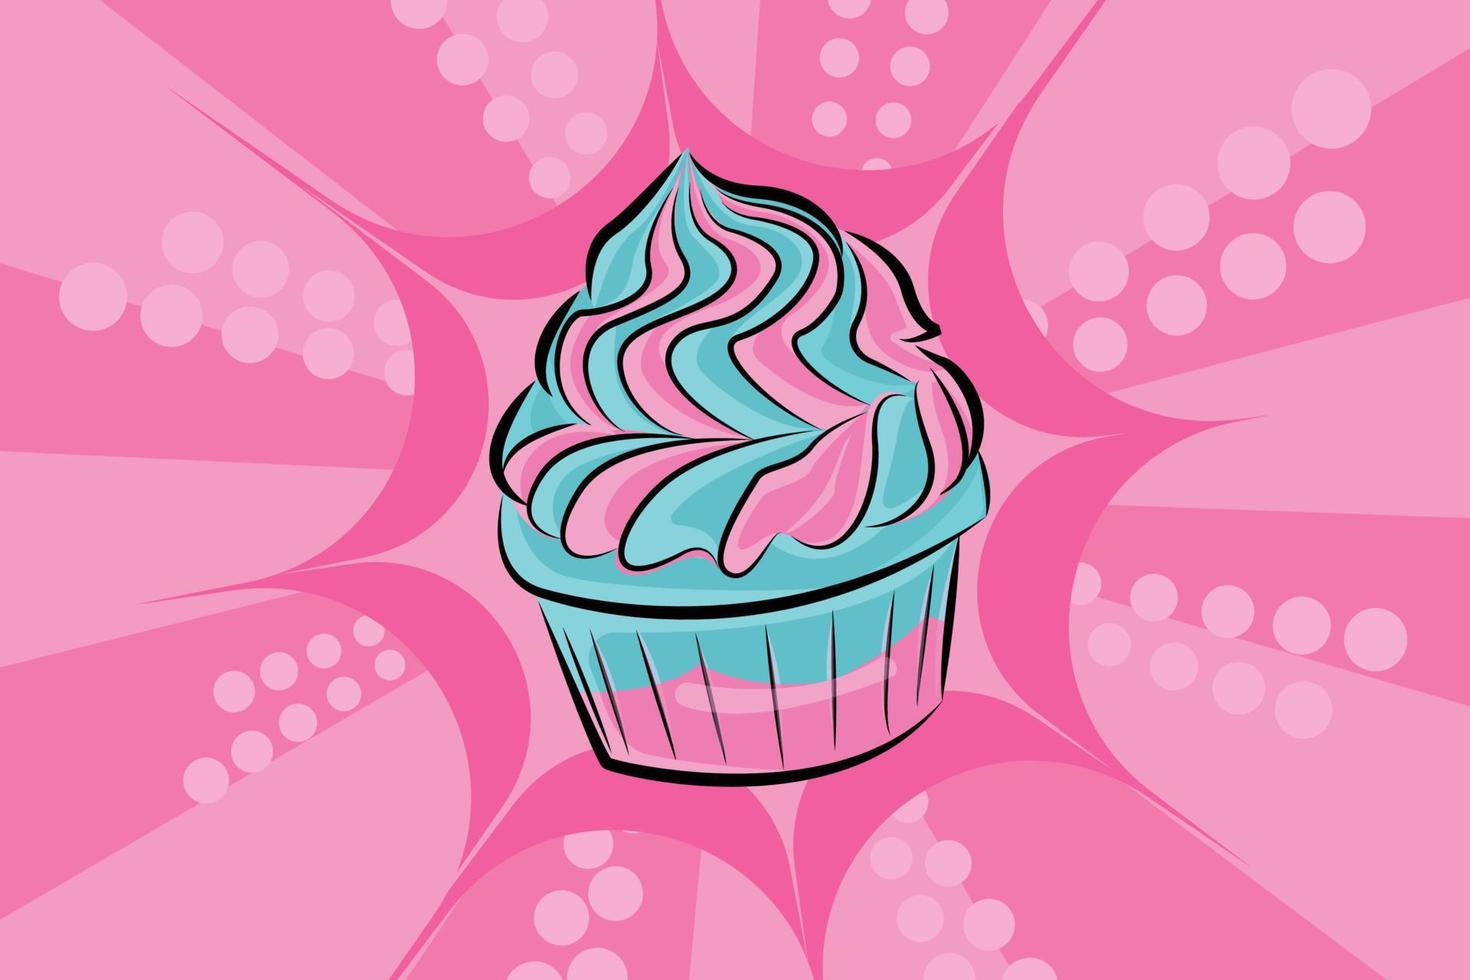 Sweet Cupcakes cartoon with pink background. vector illustration